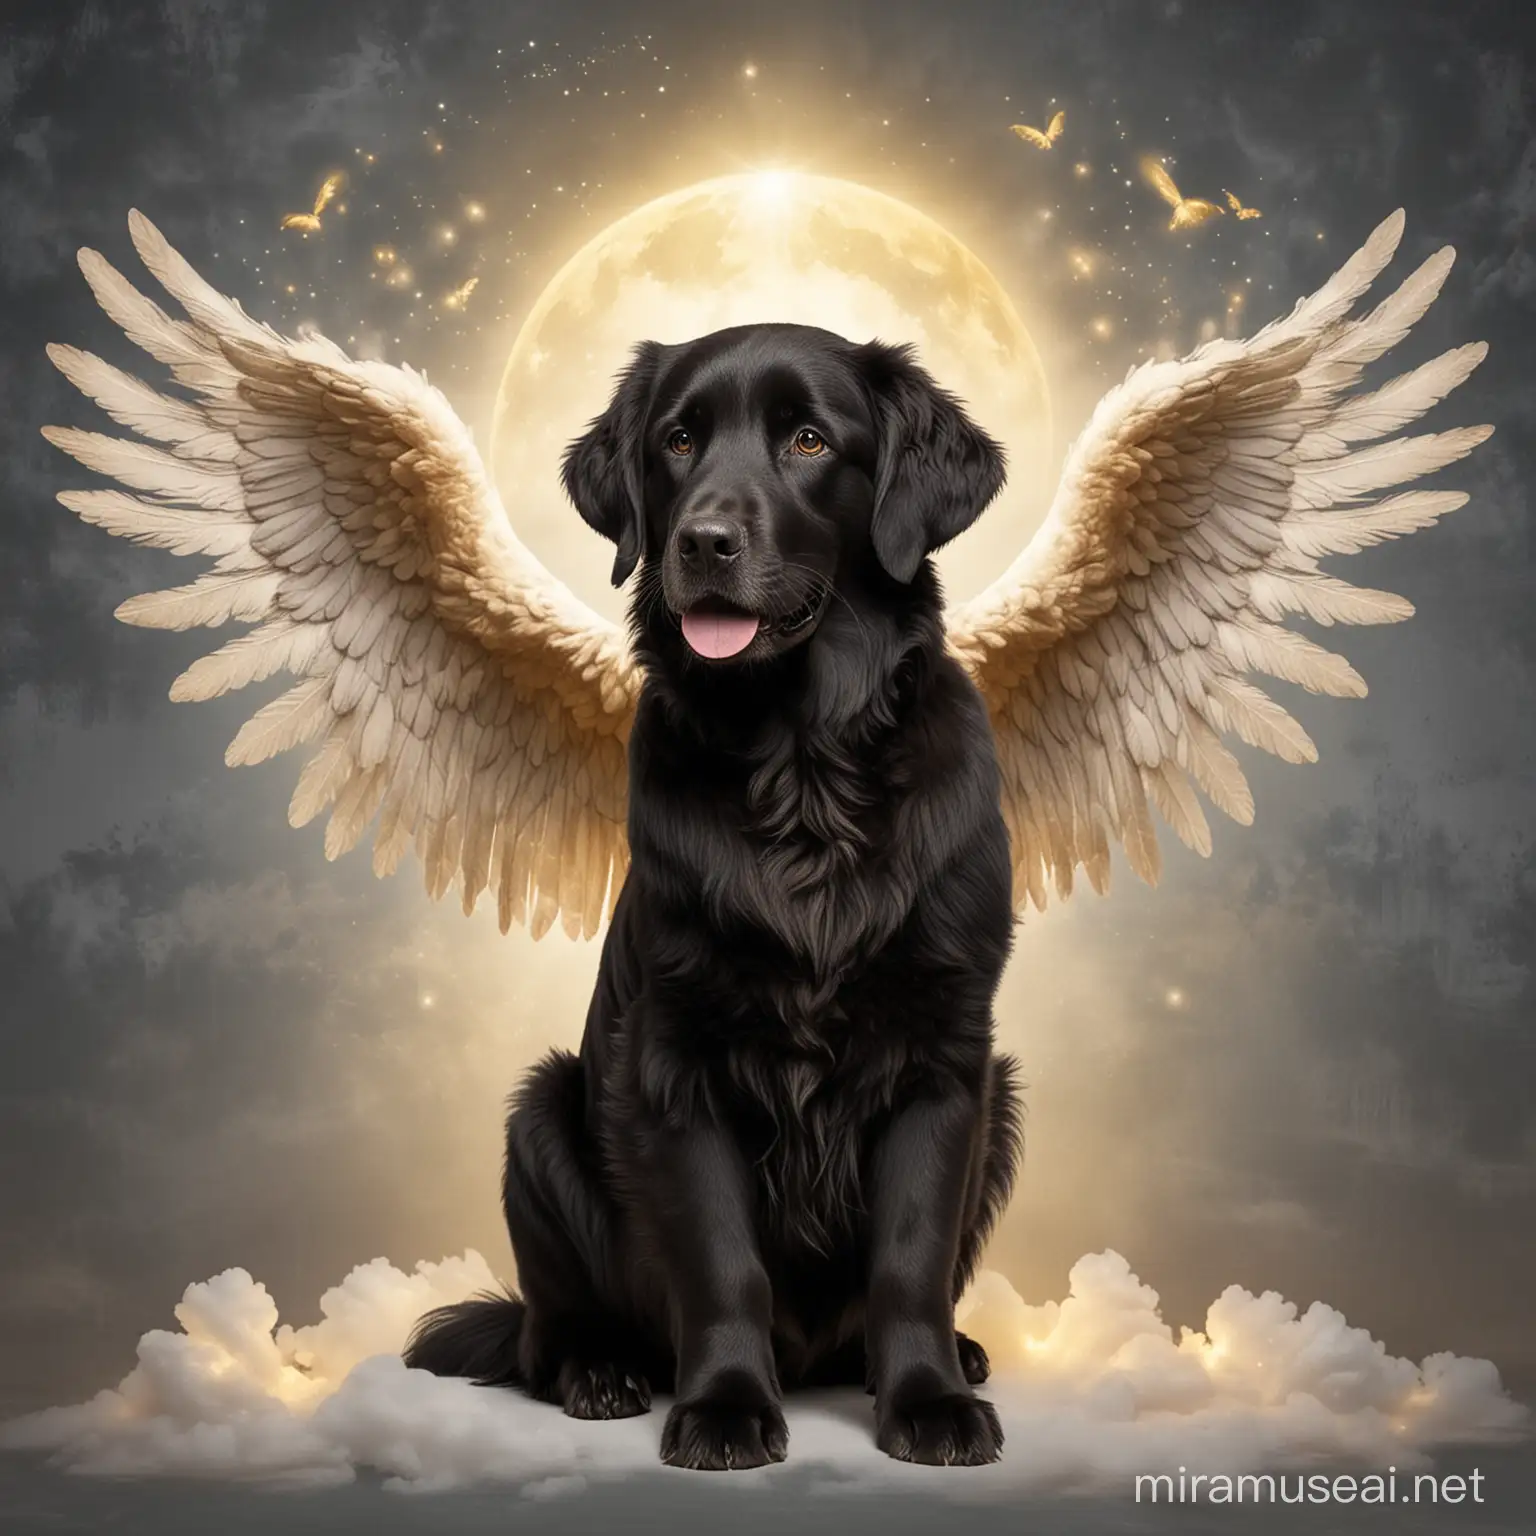 Black Golden Retriever with Angel Wings Ethereal Canine Companion